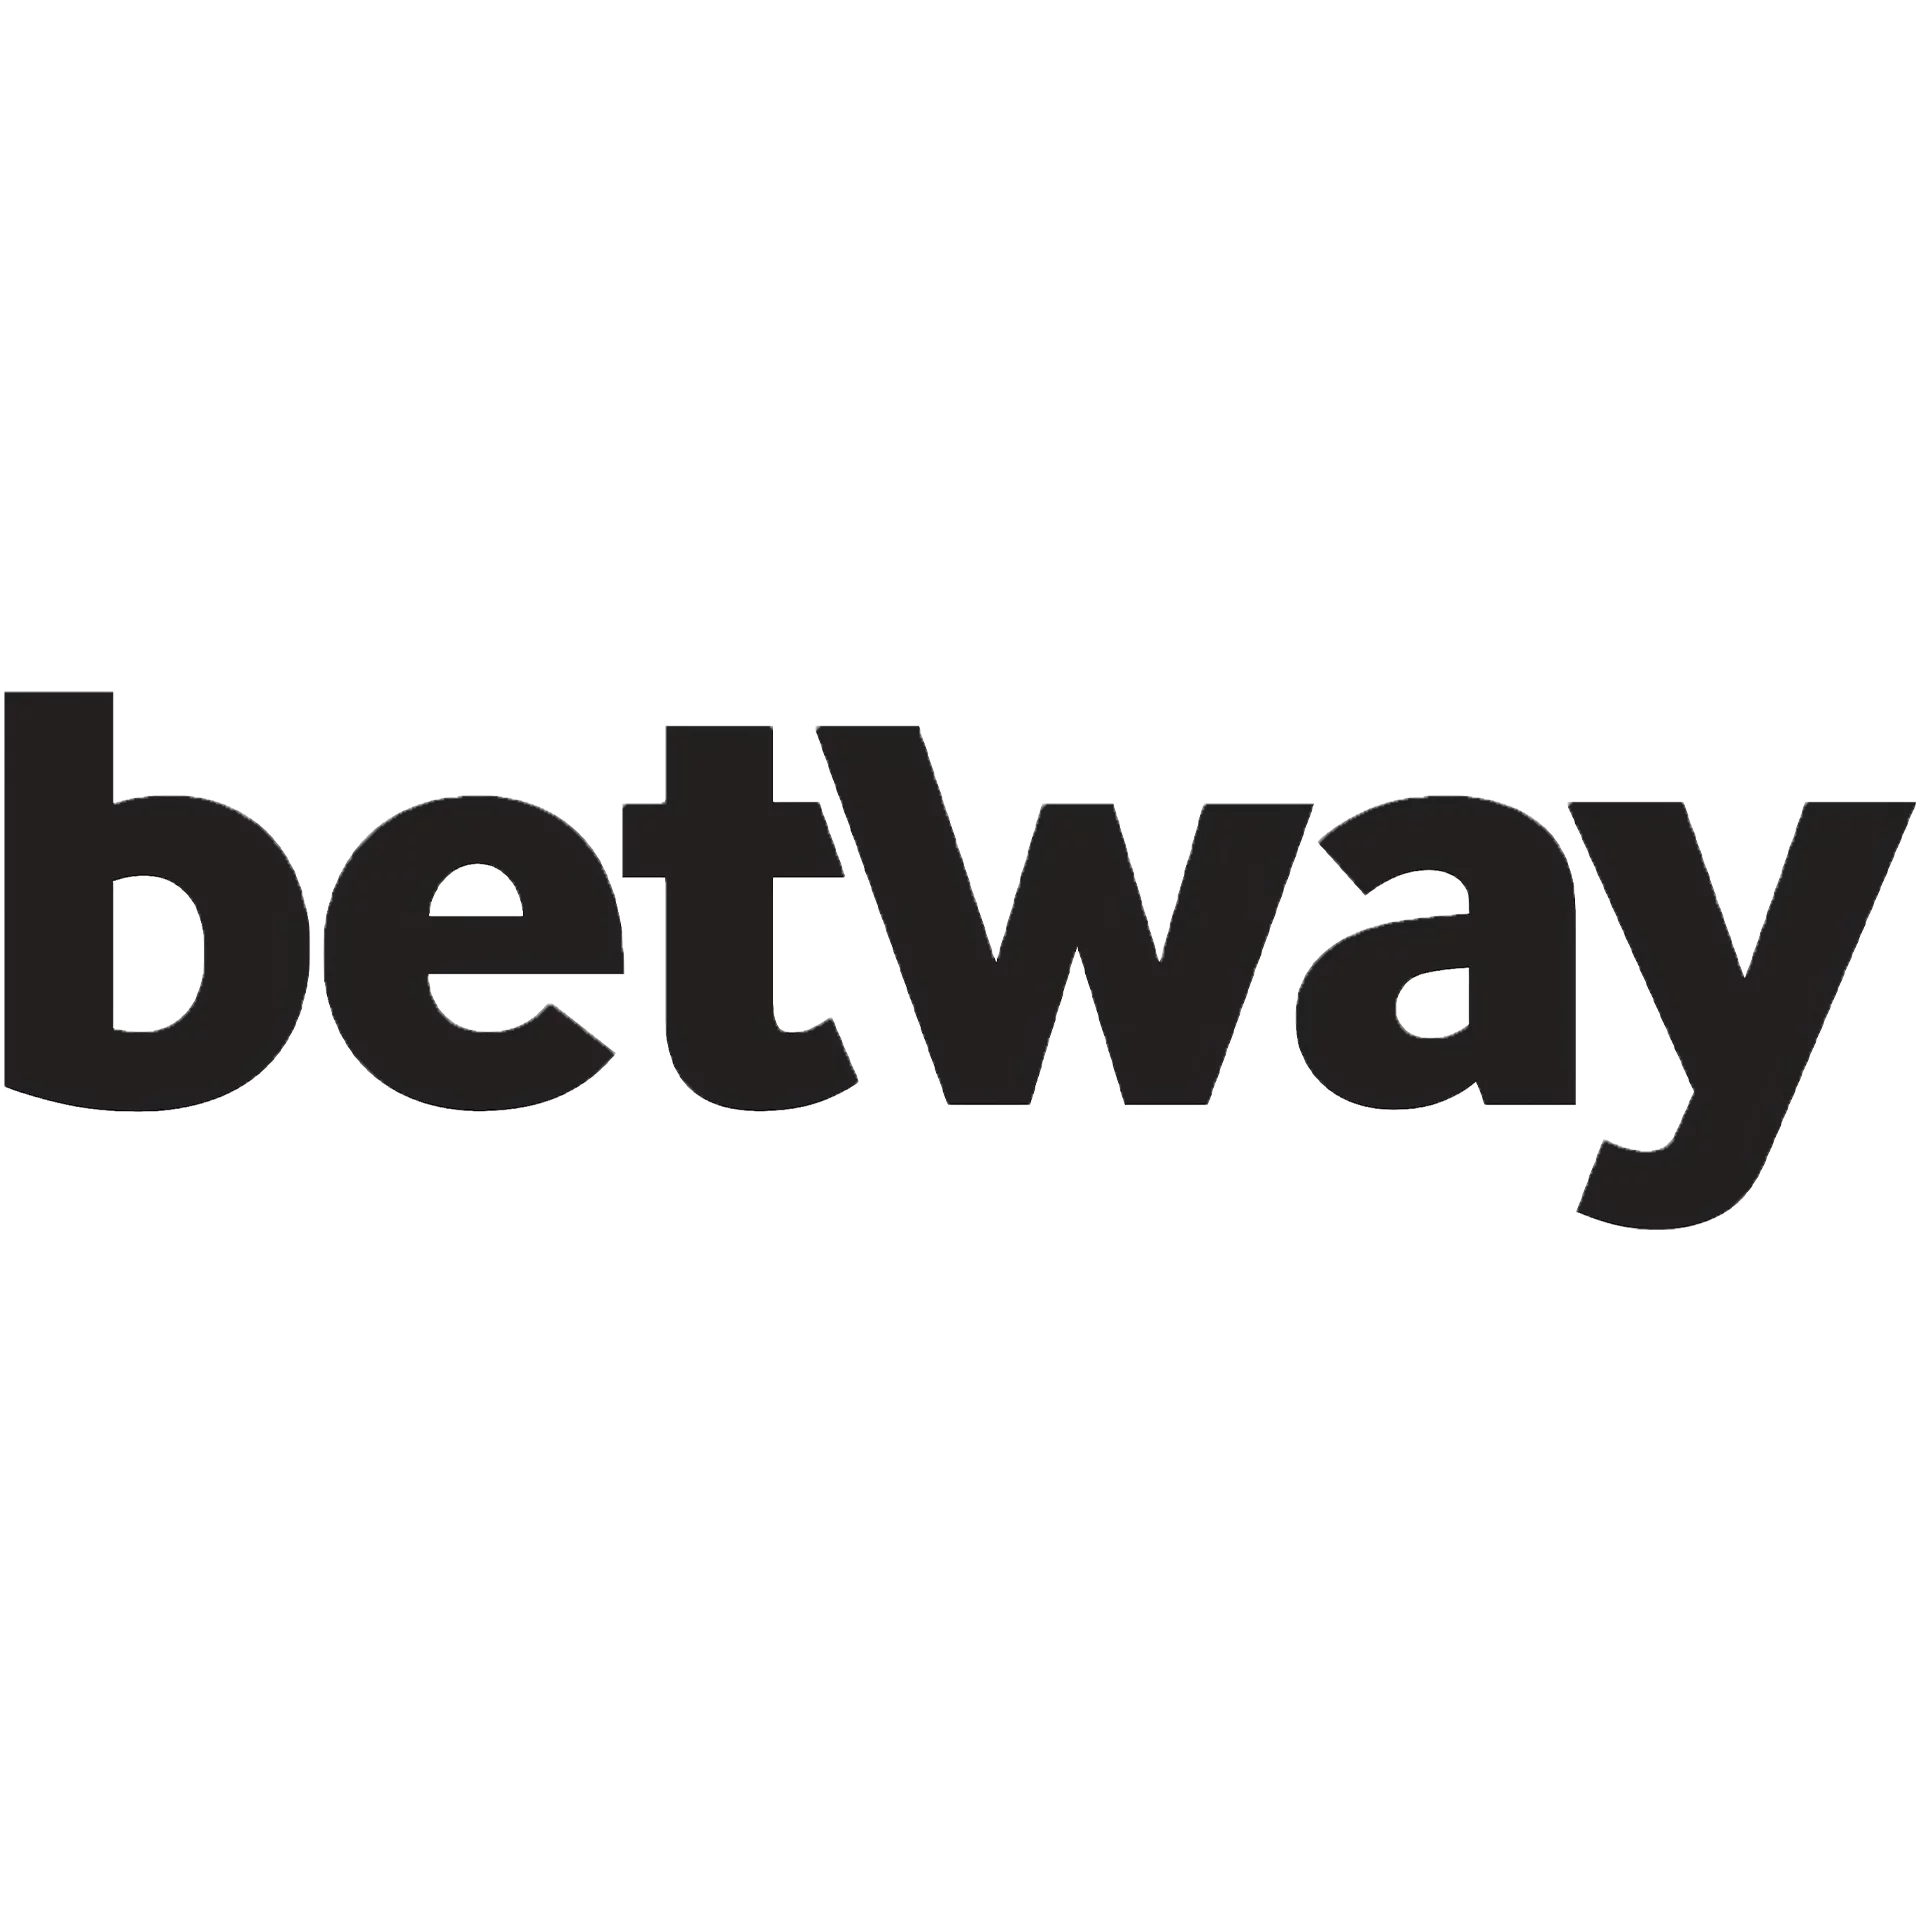 Betway is one of the most popular betting sites in India.